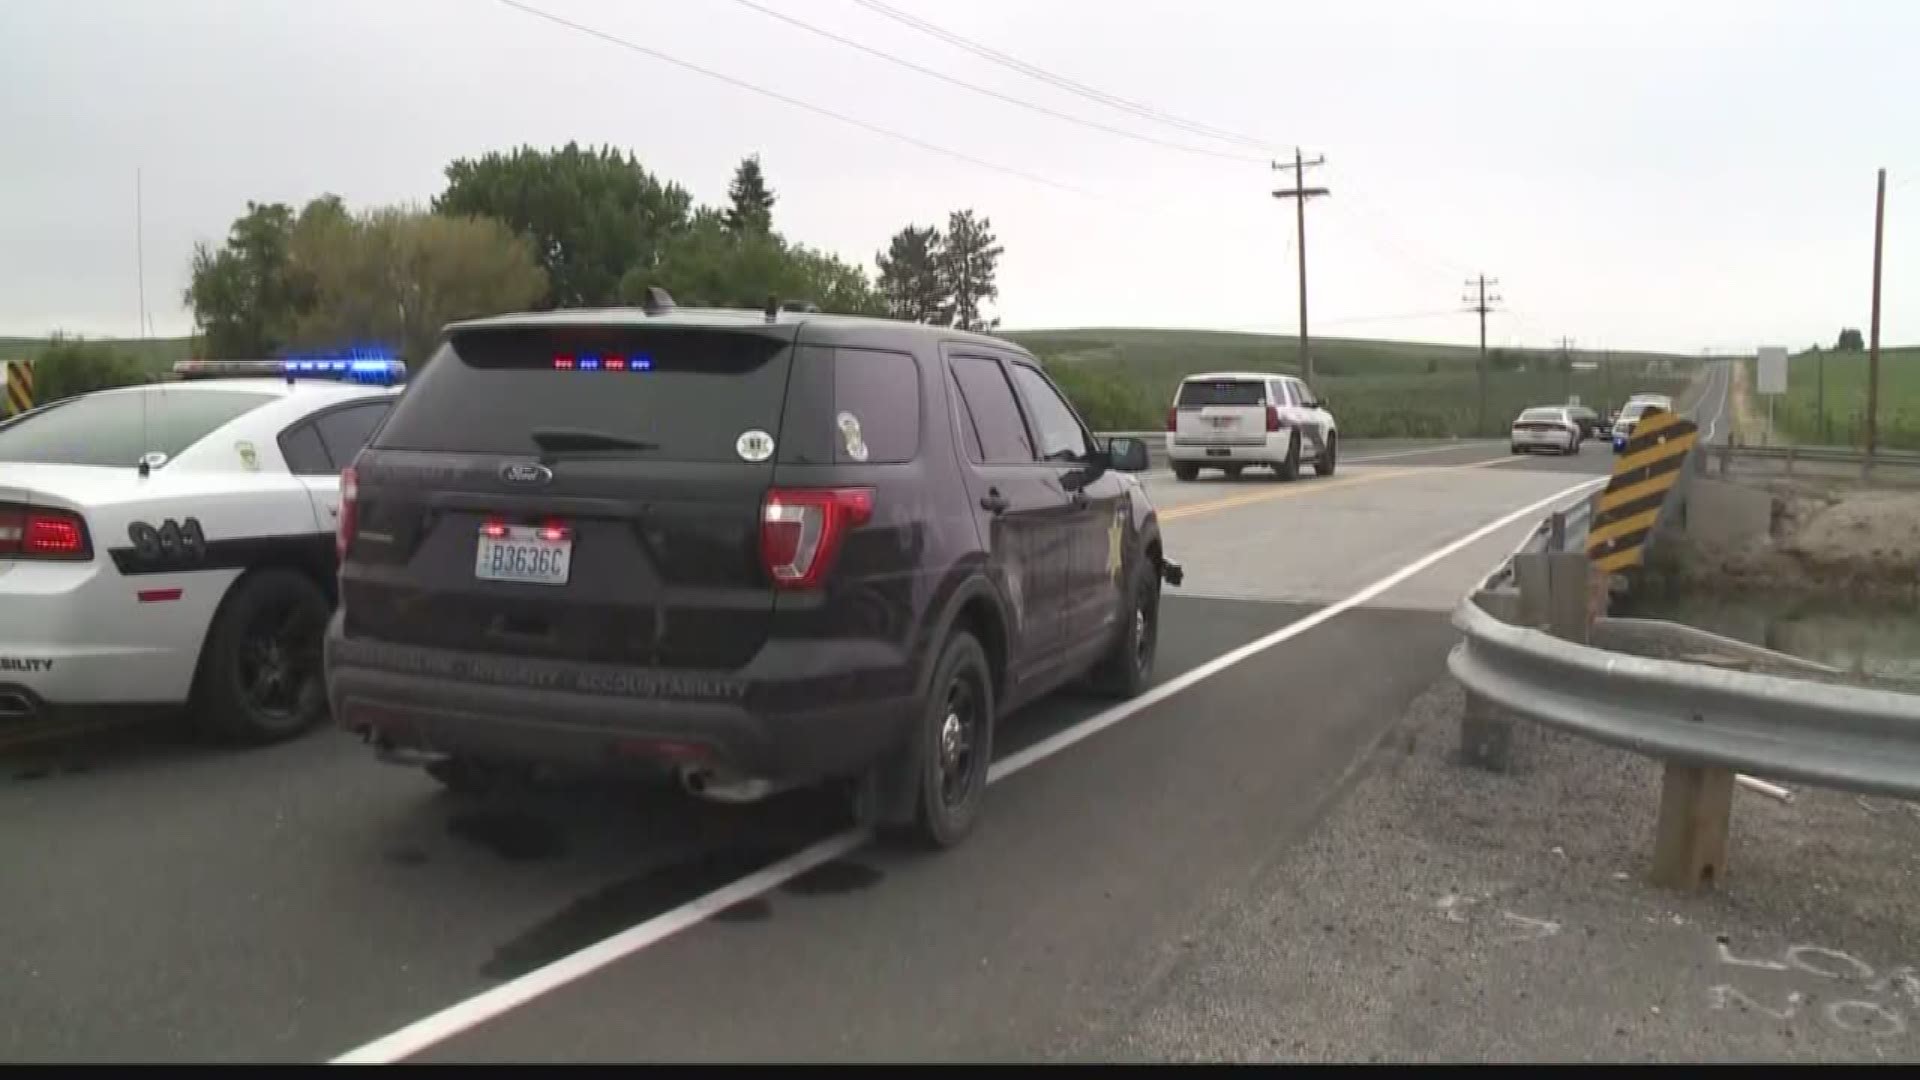 KREM 2's Rob Harris reports from Grant County after three people were killed in a wreck south of George. (5-25-17)